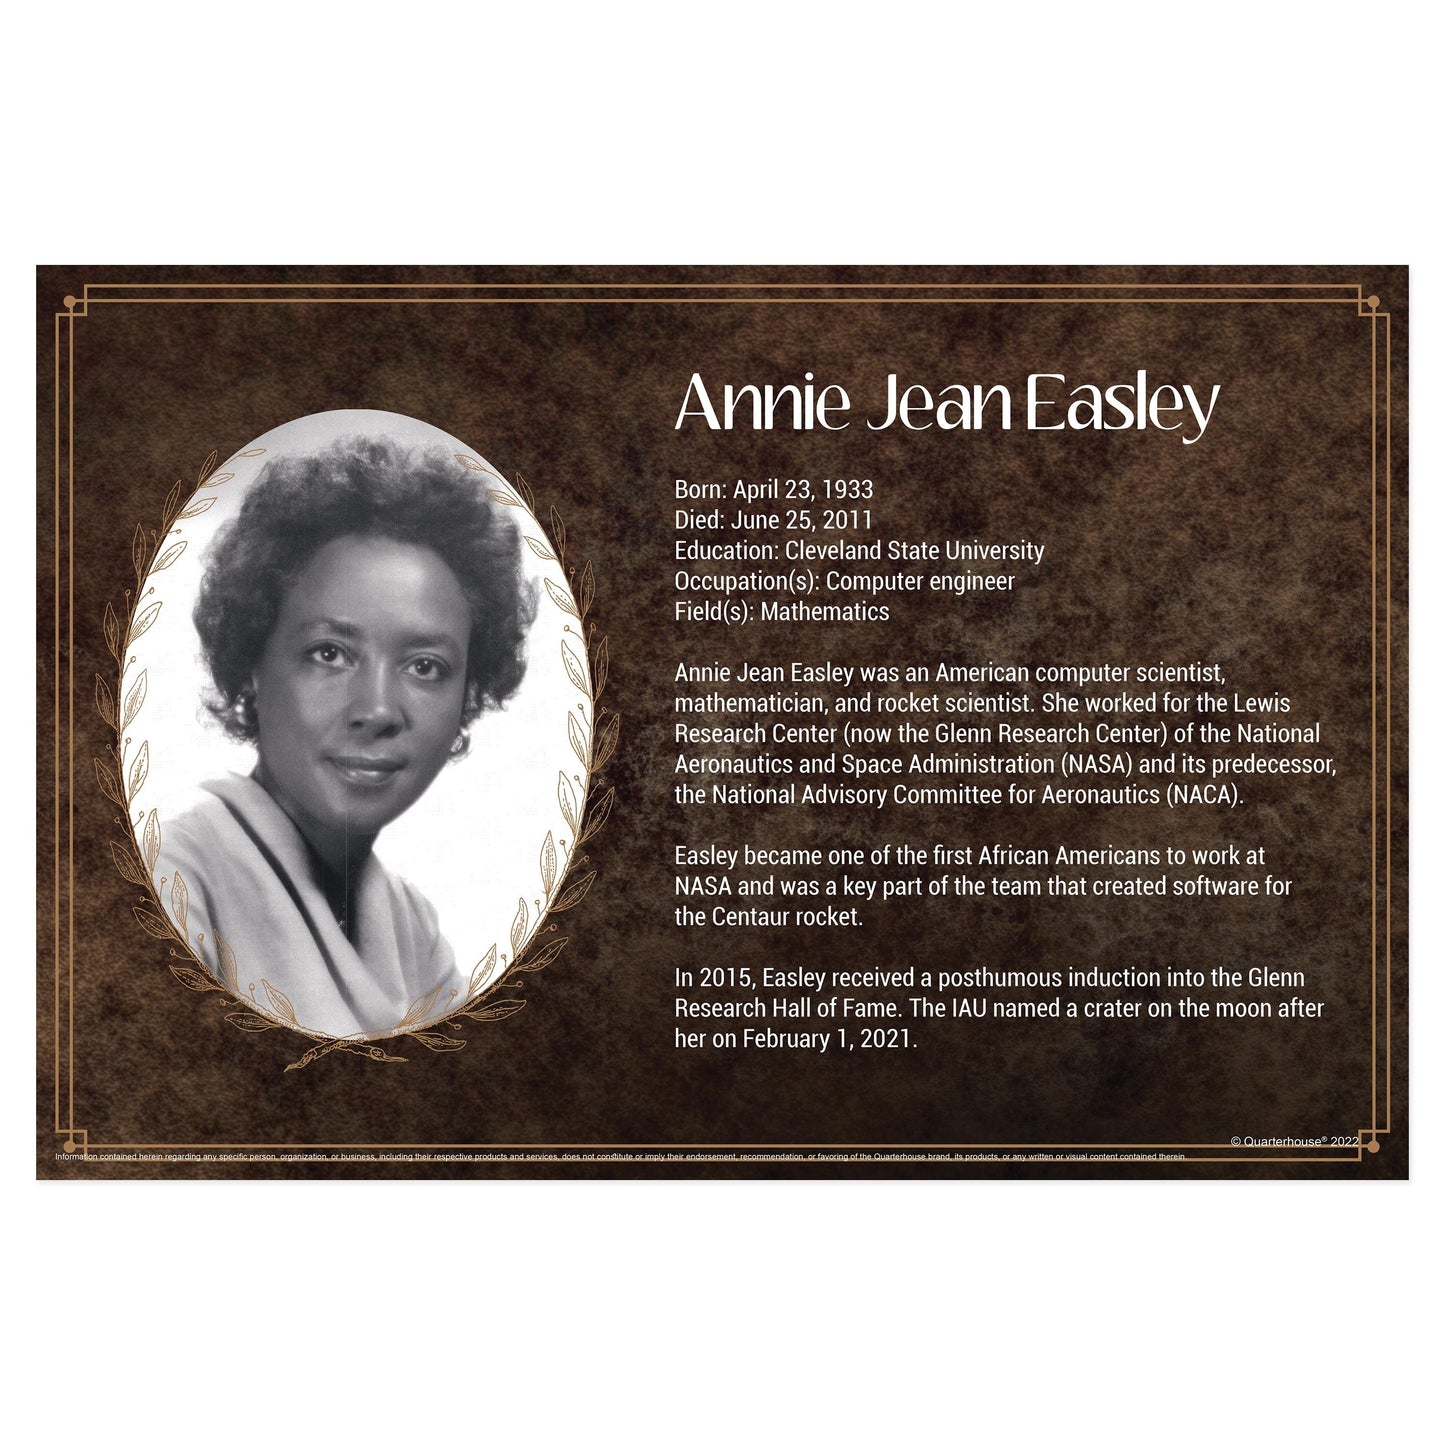 Quarterhouse Black Scientists - Annie Jean Easley Biographical Poster, Science Classroom Materials for Teachers